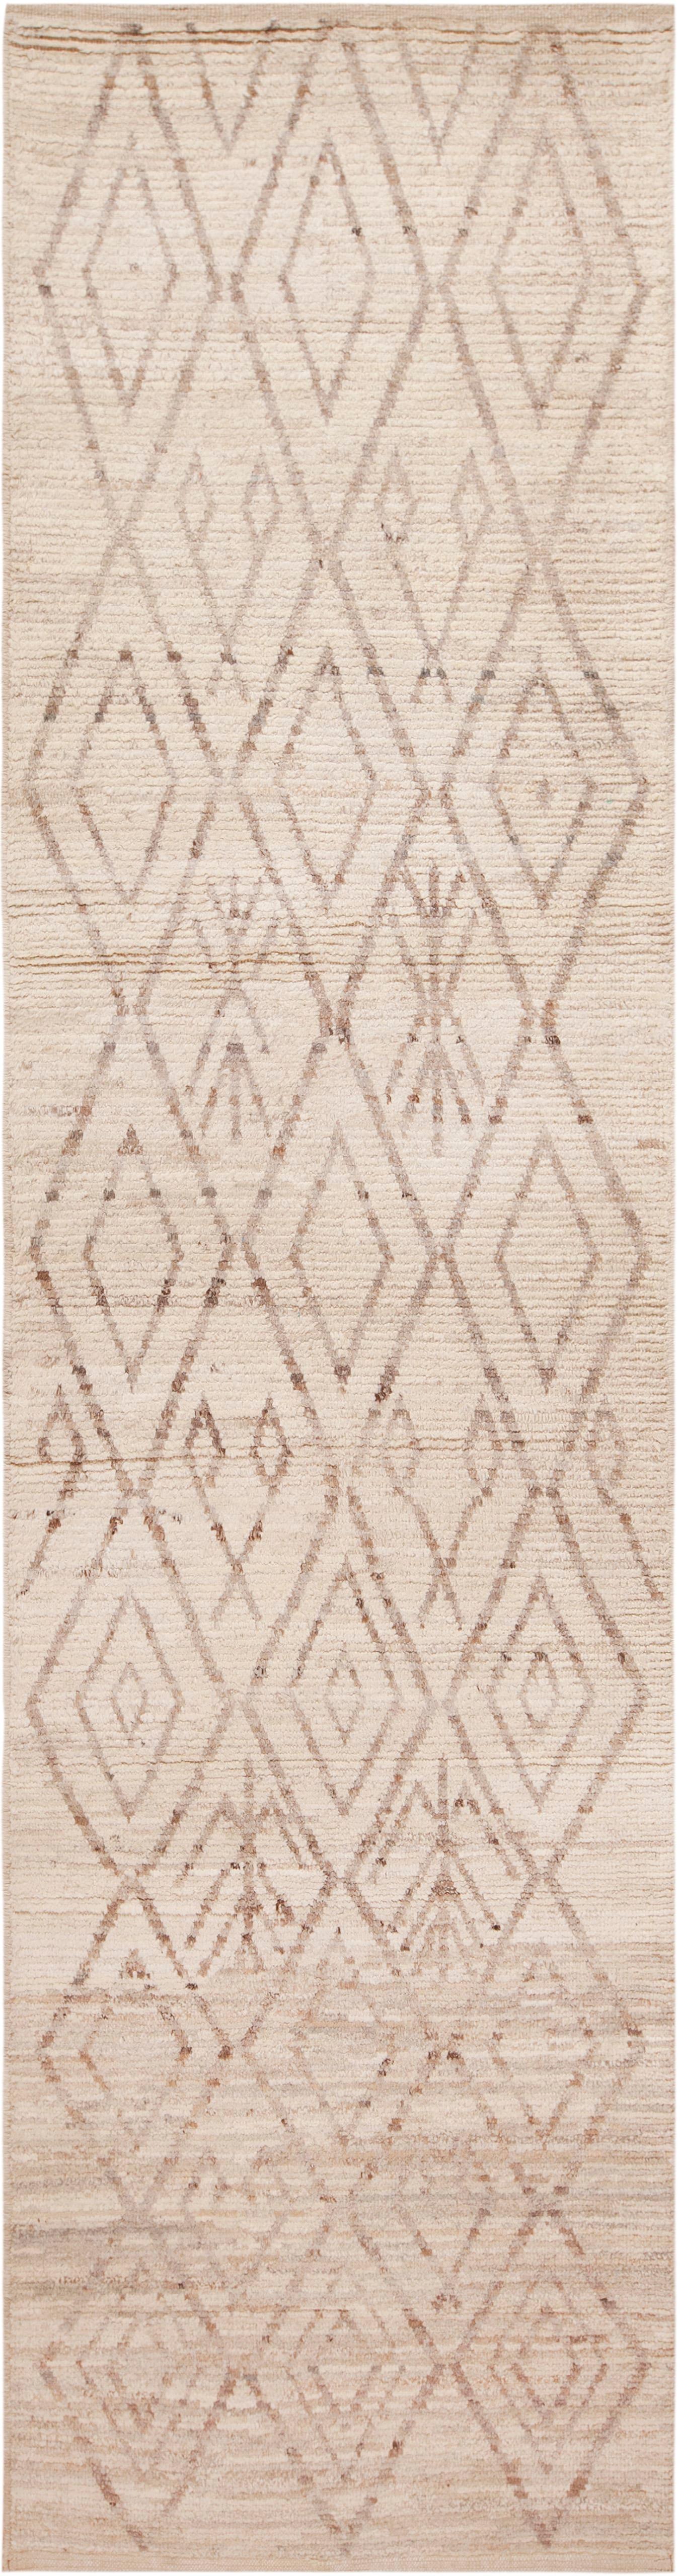 Hand-Knotted Nazmiyal Collection Tribal Beni Ourain Design Modern Runner Rug 3'4